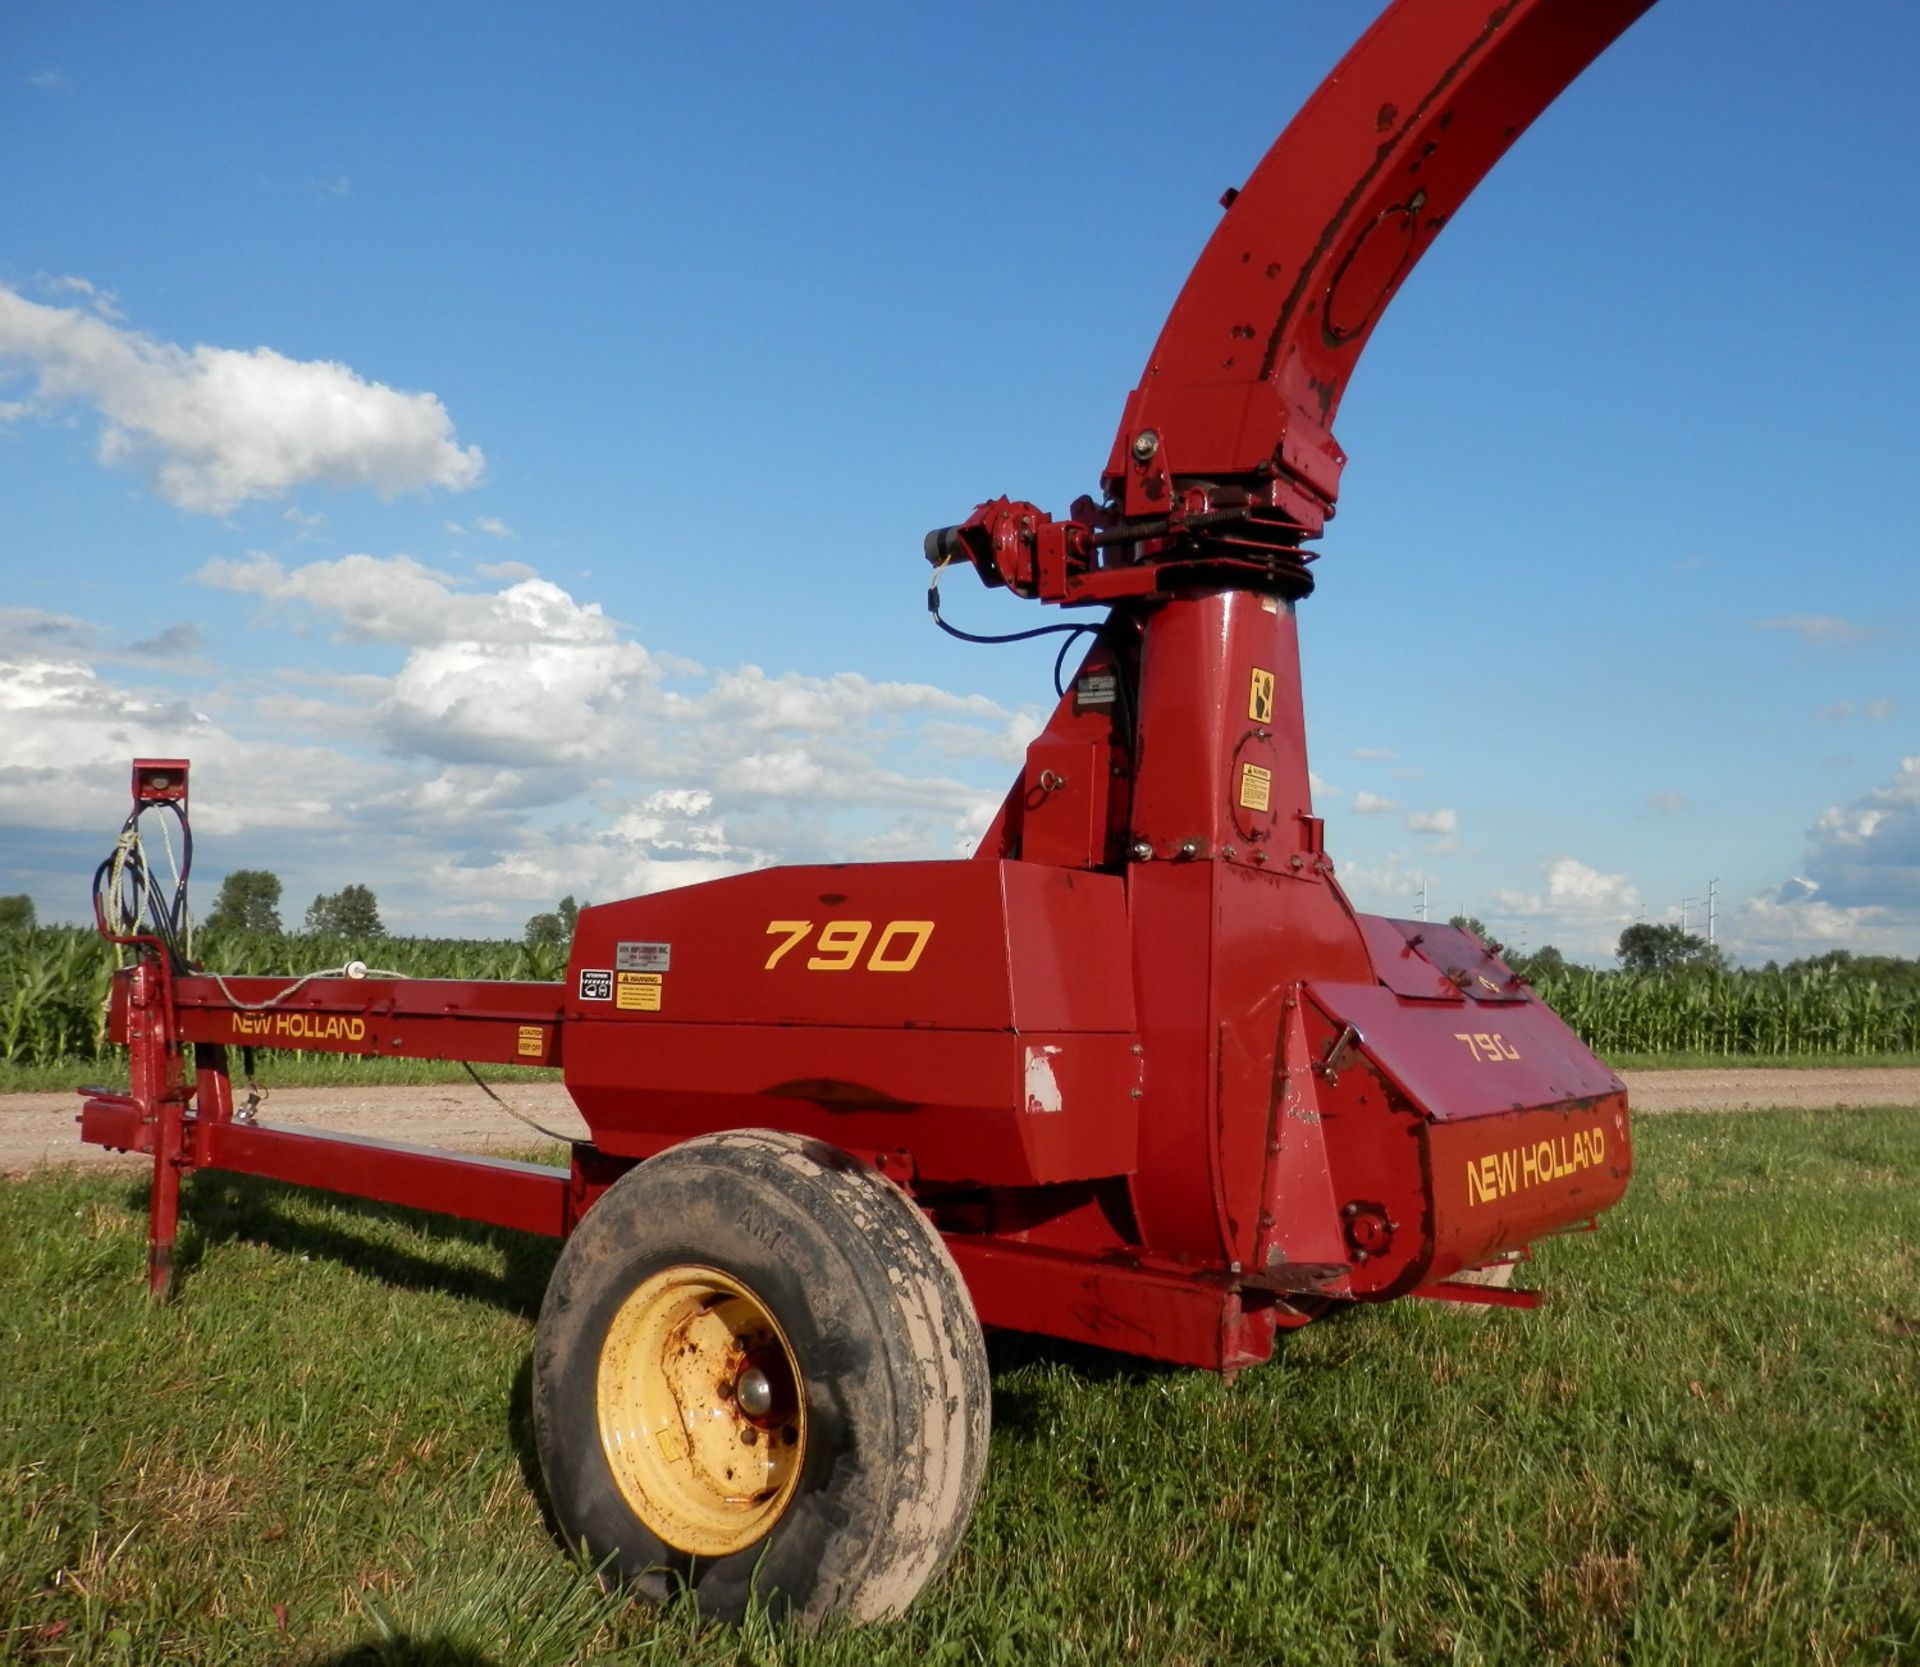 NEW HOLLAND 790 FORAGE CHOPPER - Image 4 of 5